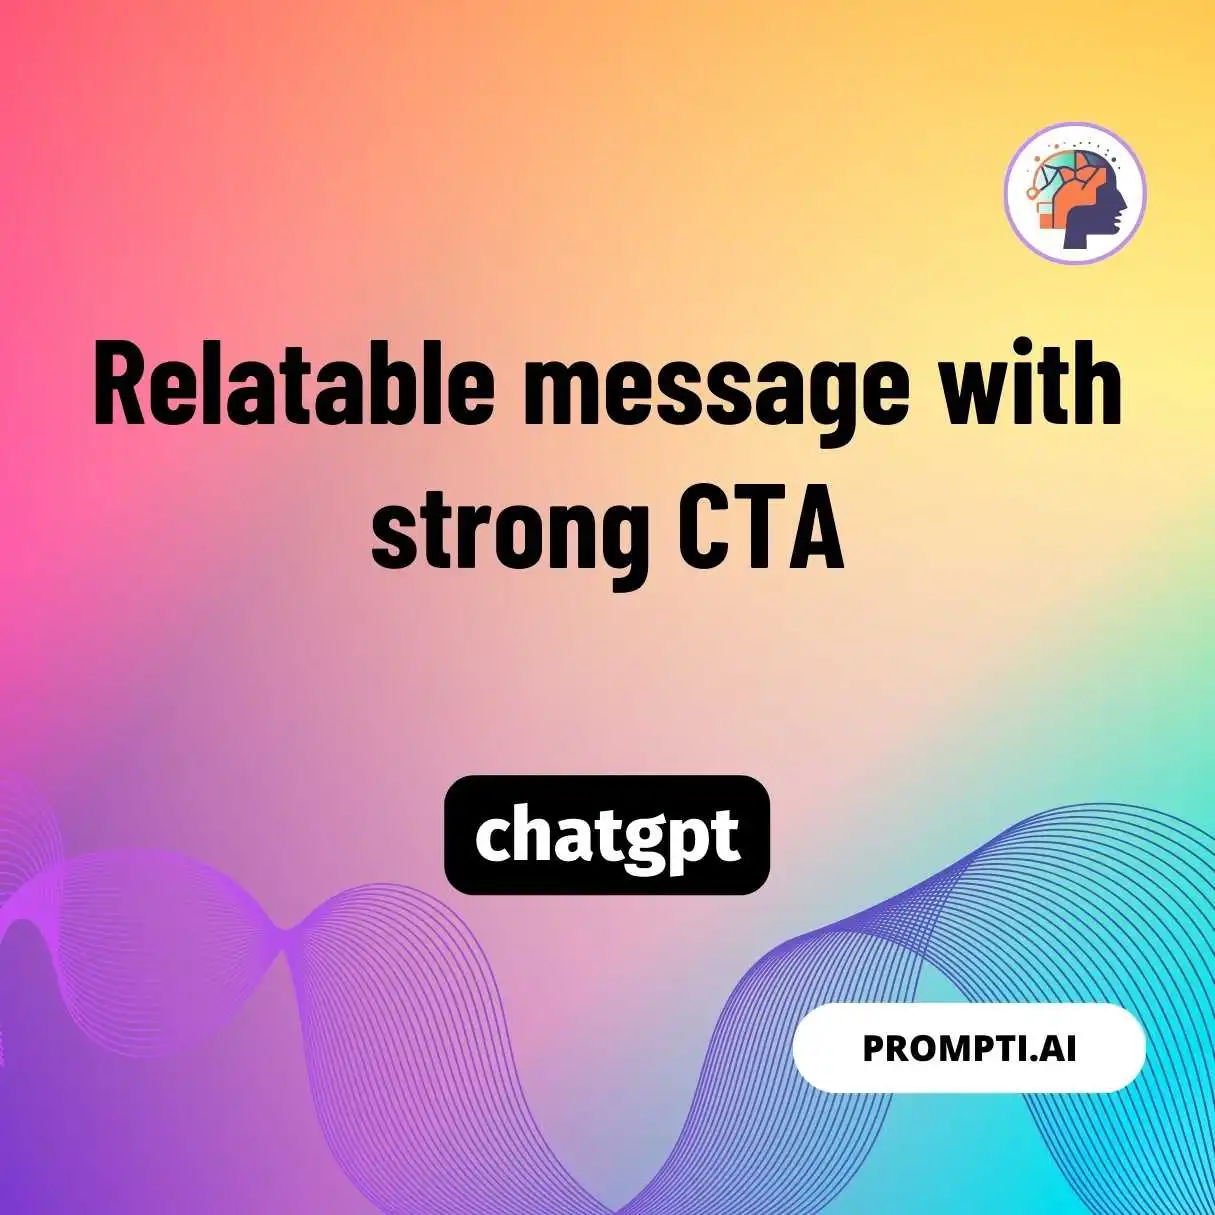 Relatable message with strong CTA